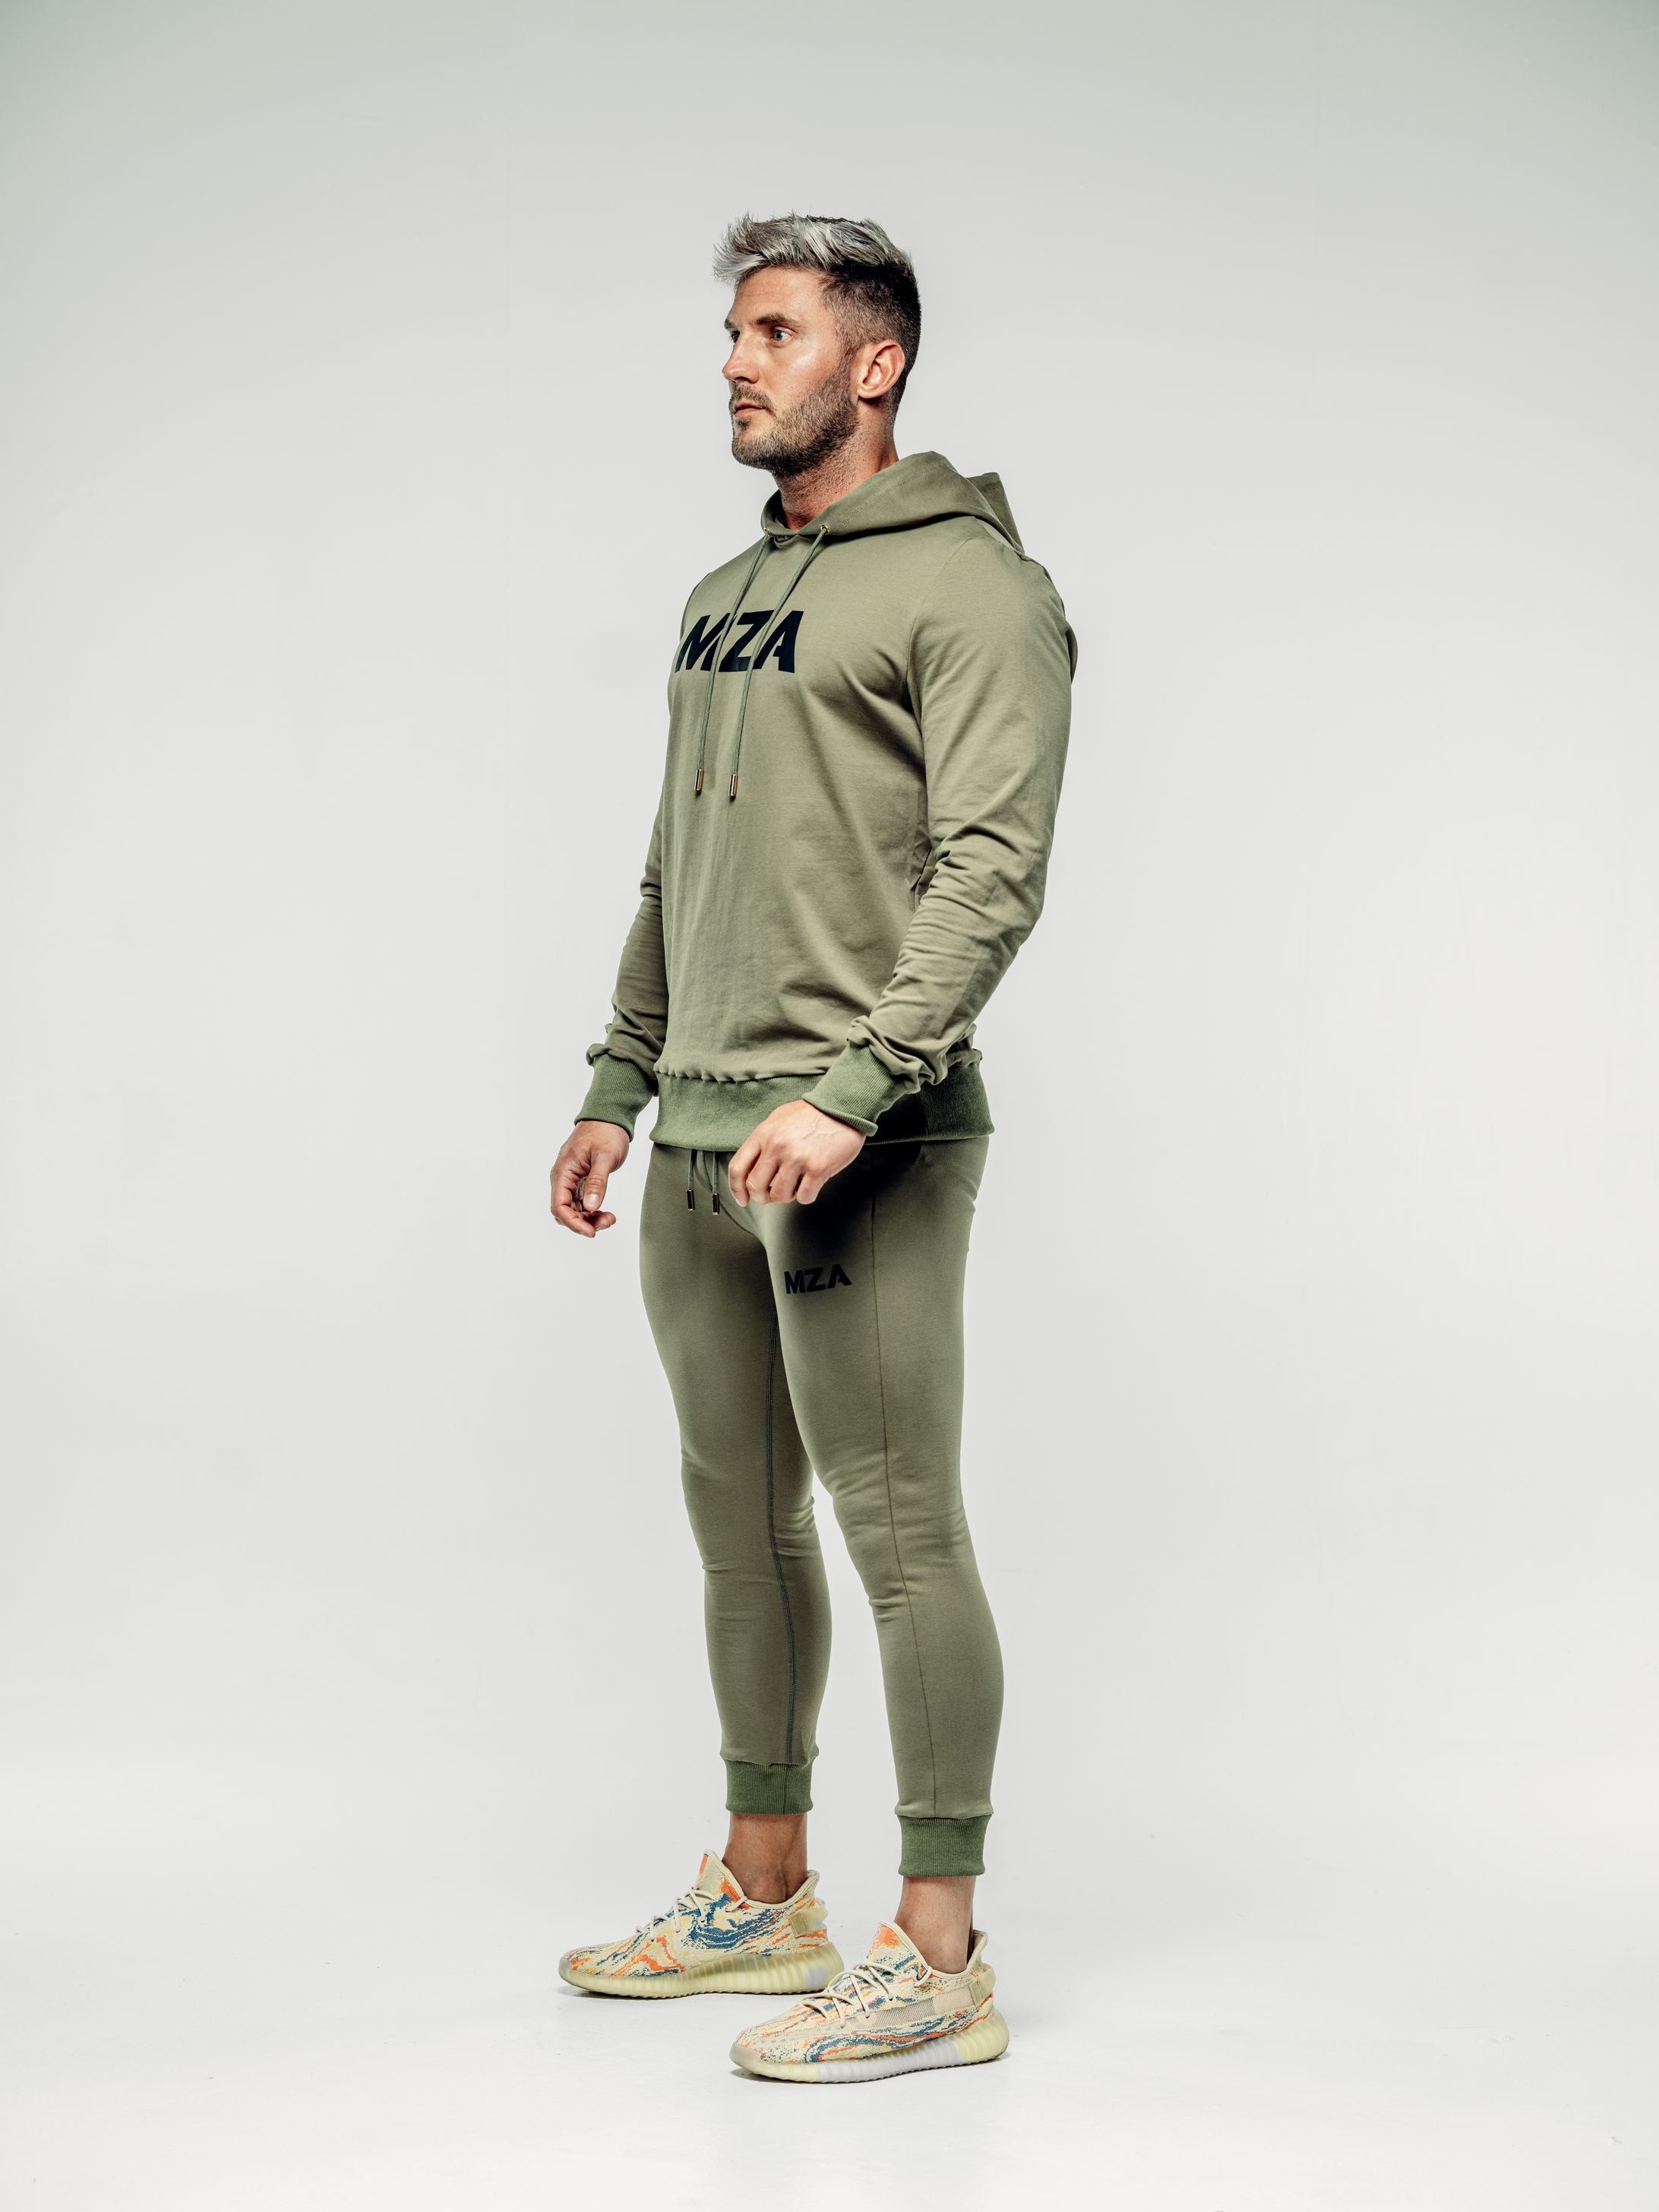 This is a 45 degree angle full body shot of Shane wearing the new standard hoodie in Khaki.  Shane is wearing the matching new standard joggers in khaki.